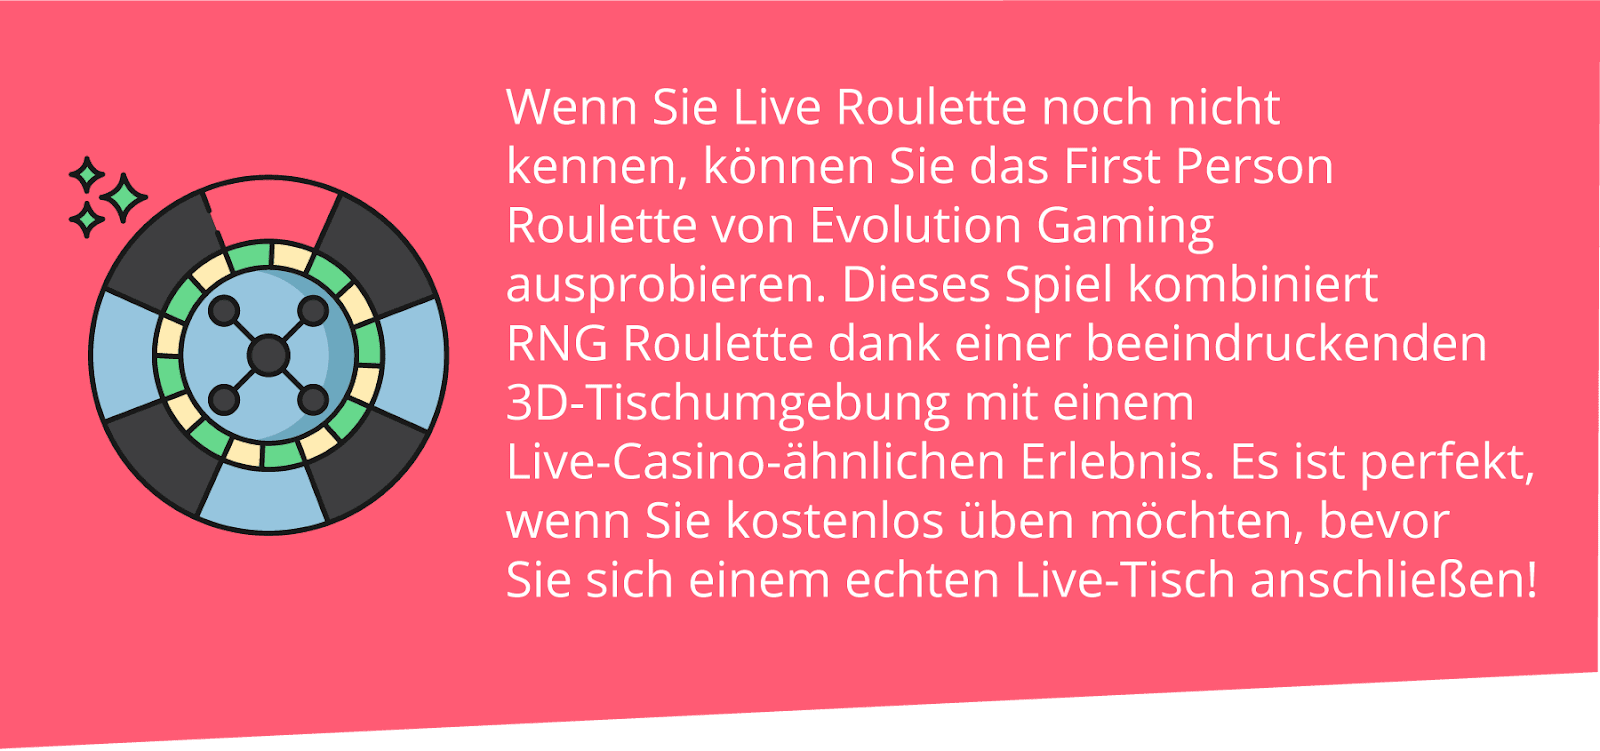 Interessantes über First Person Roulette